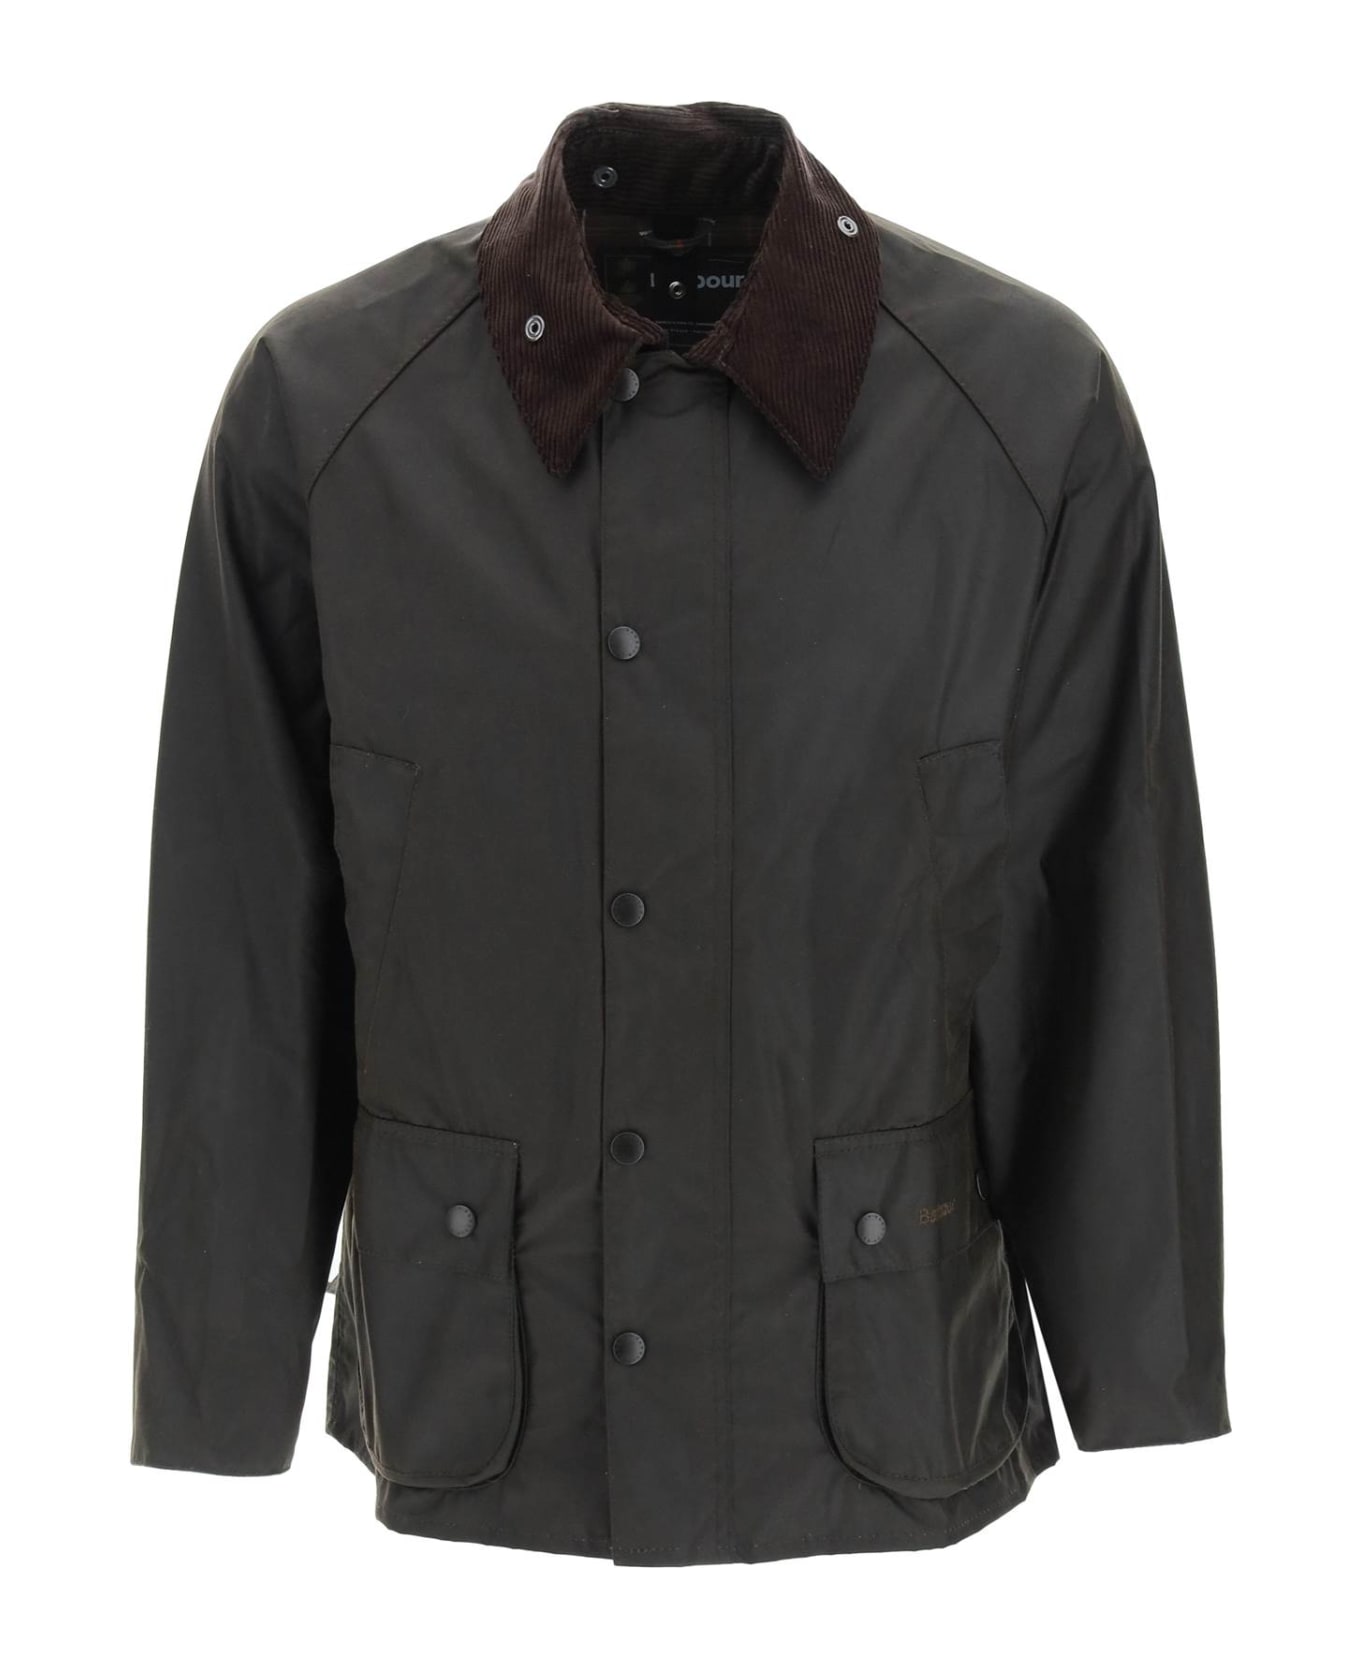 Barbour Bedale Classic Waxed Jacket - Green